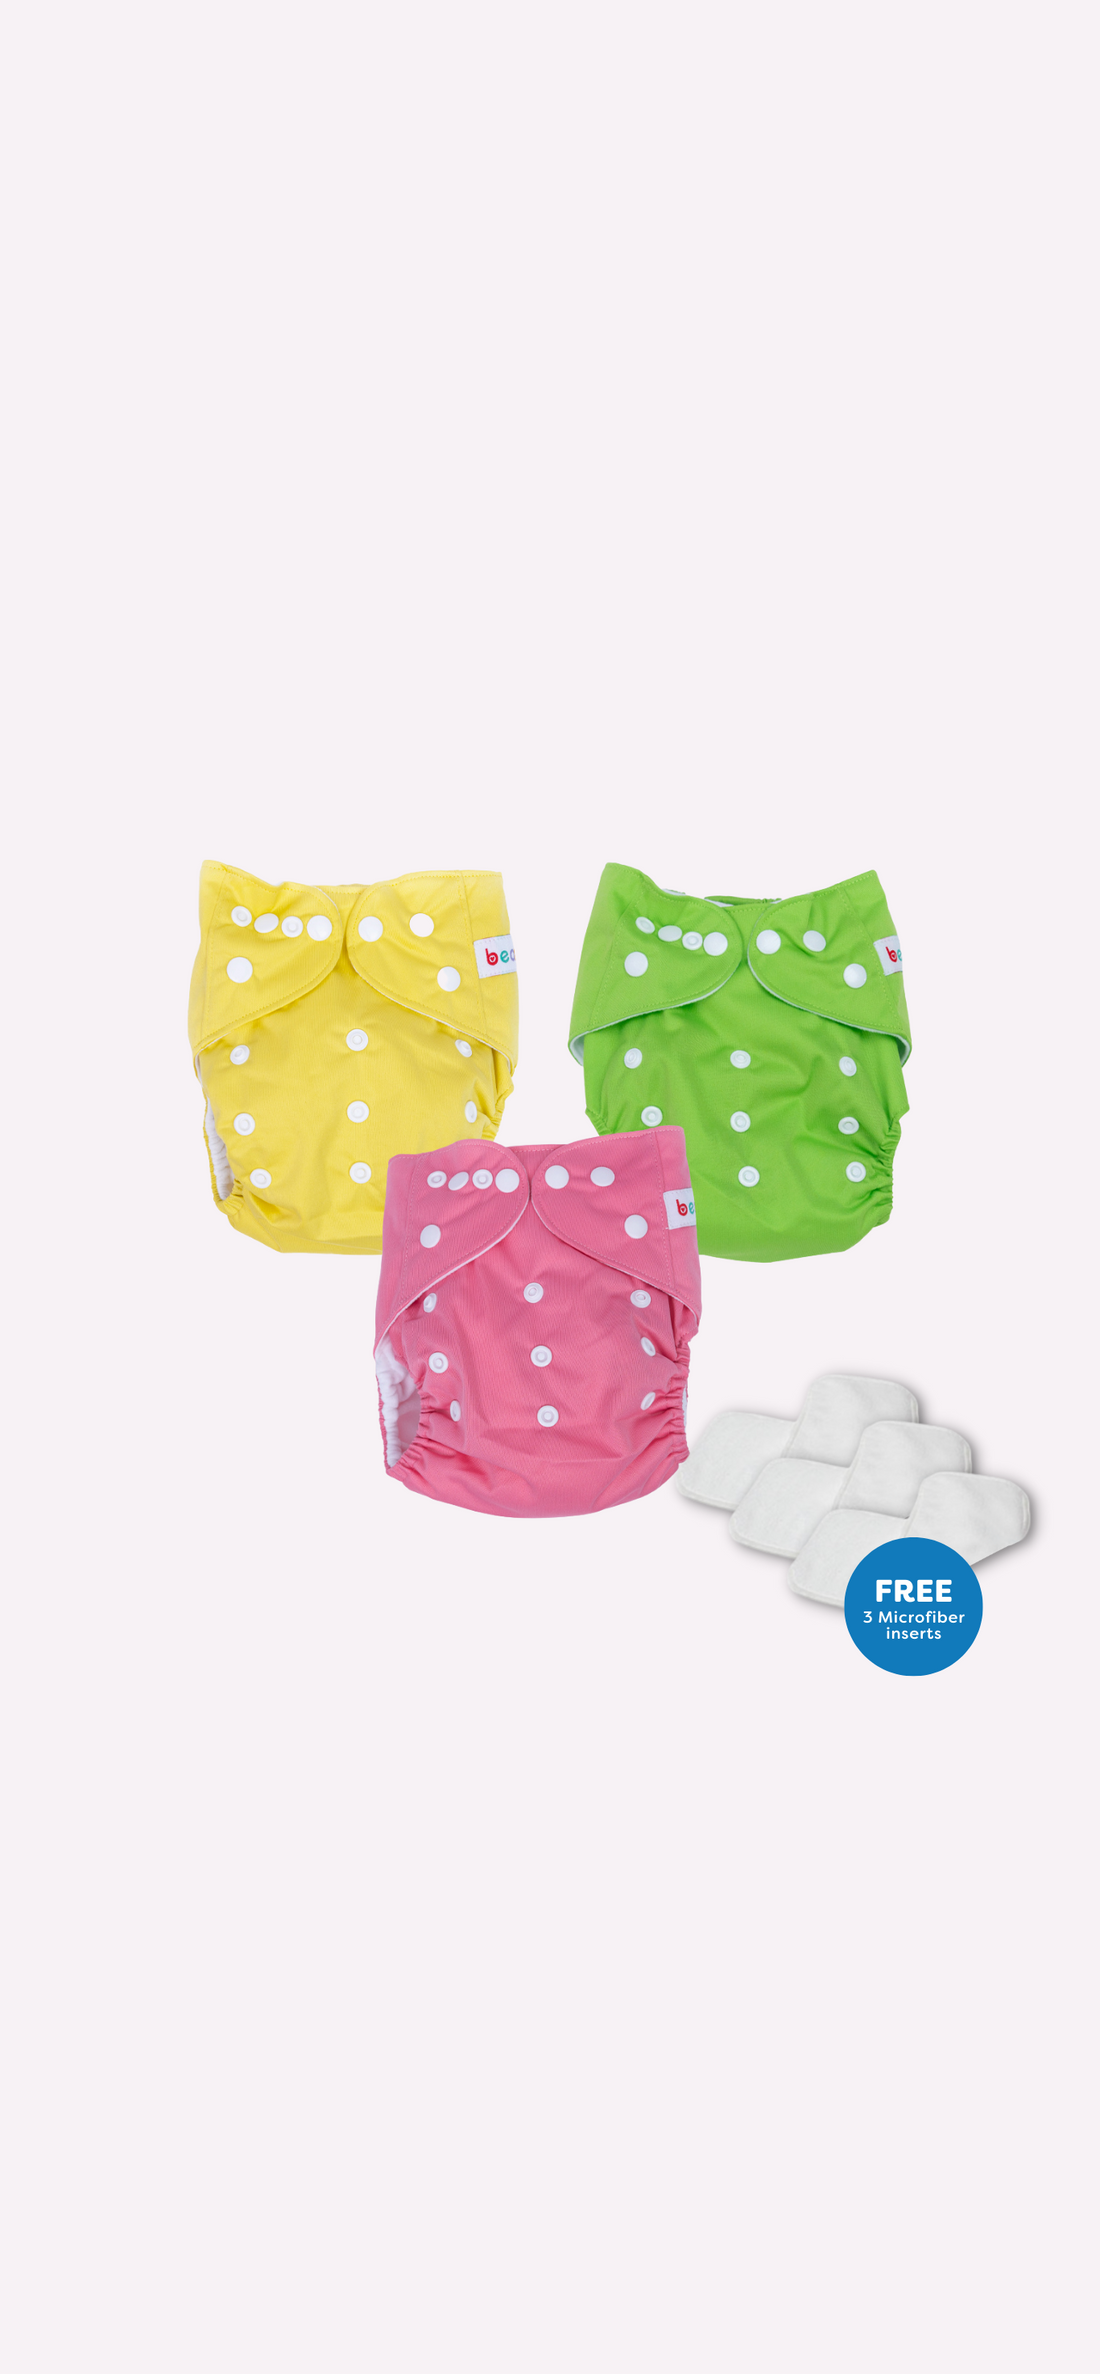 Snappies Basic Popsicle Cloth Diaper Set of 3